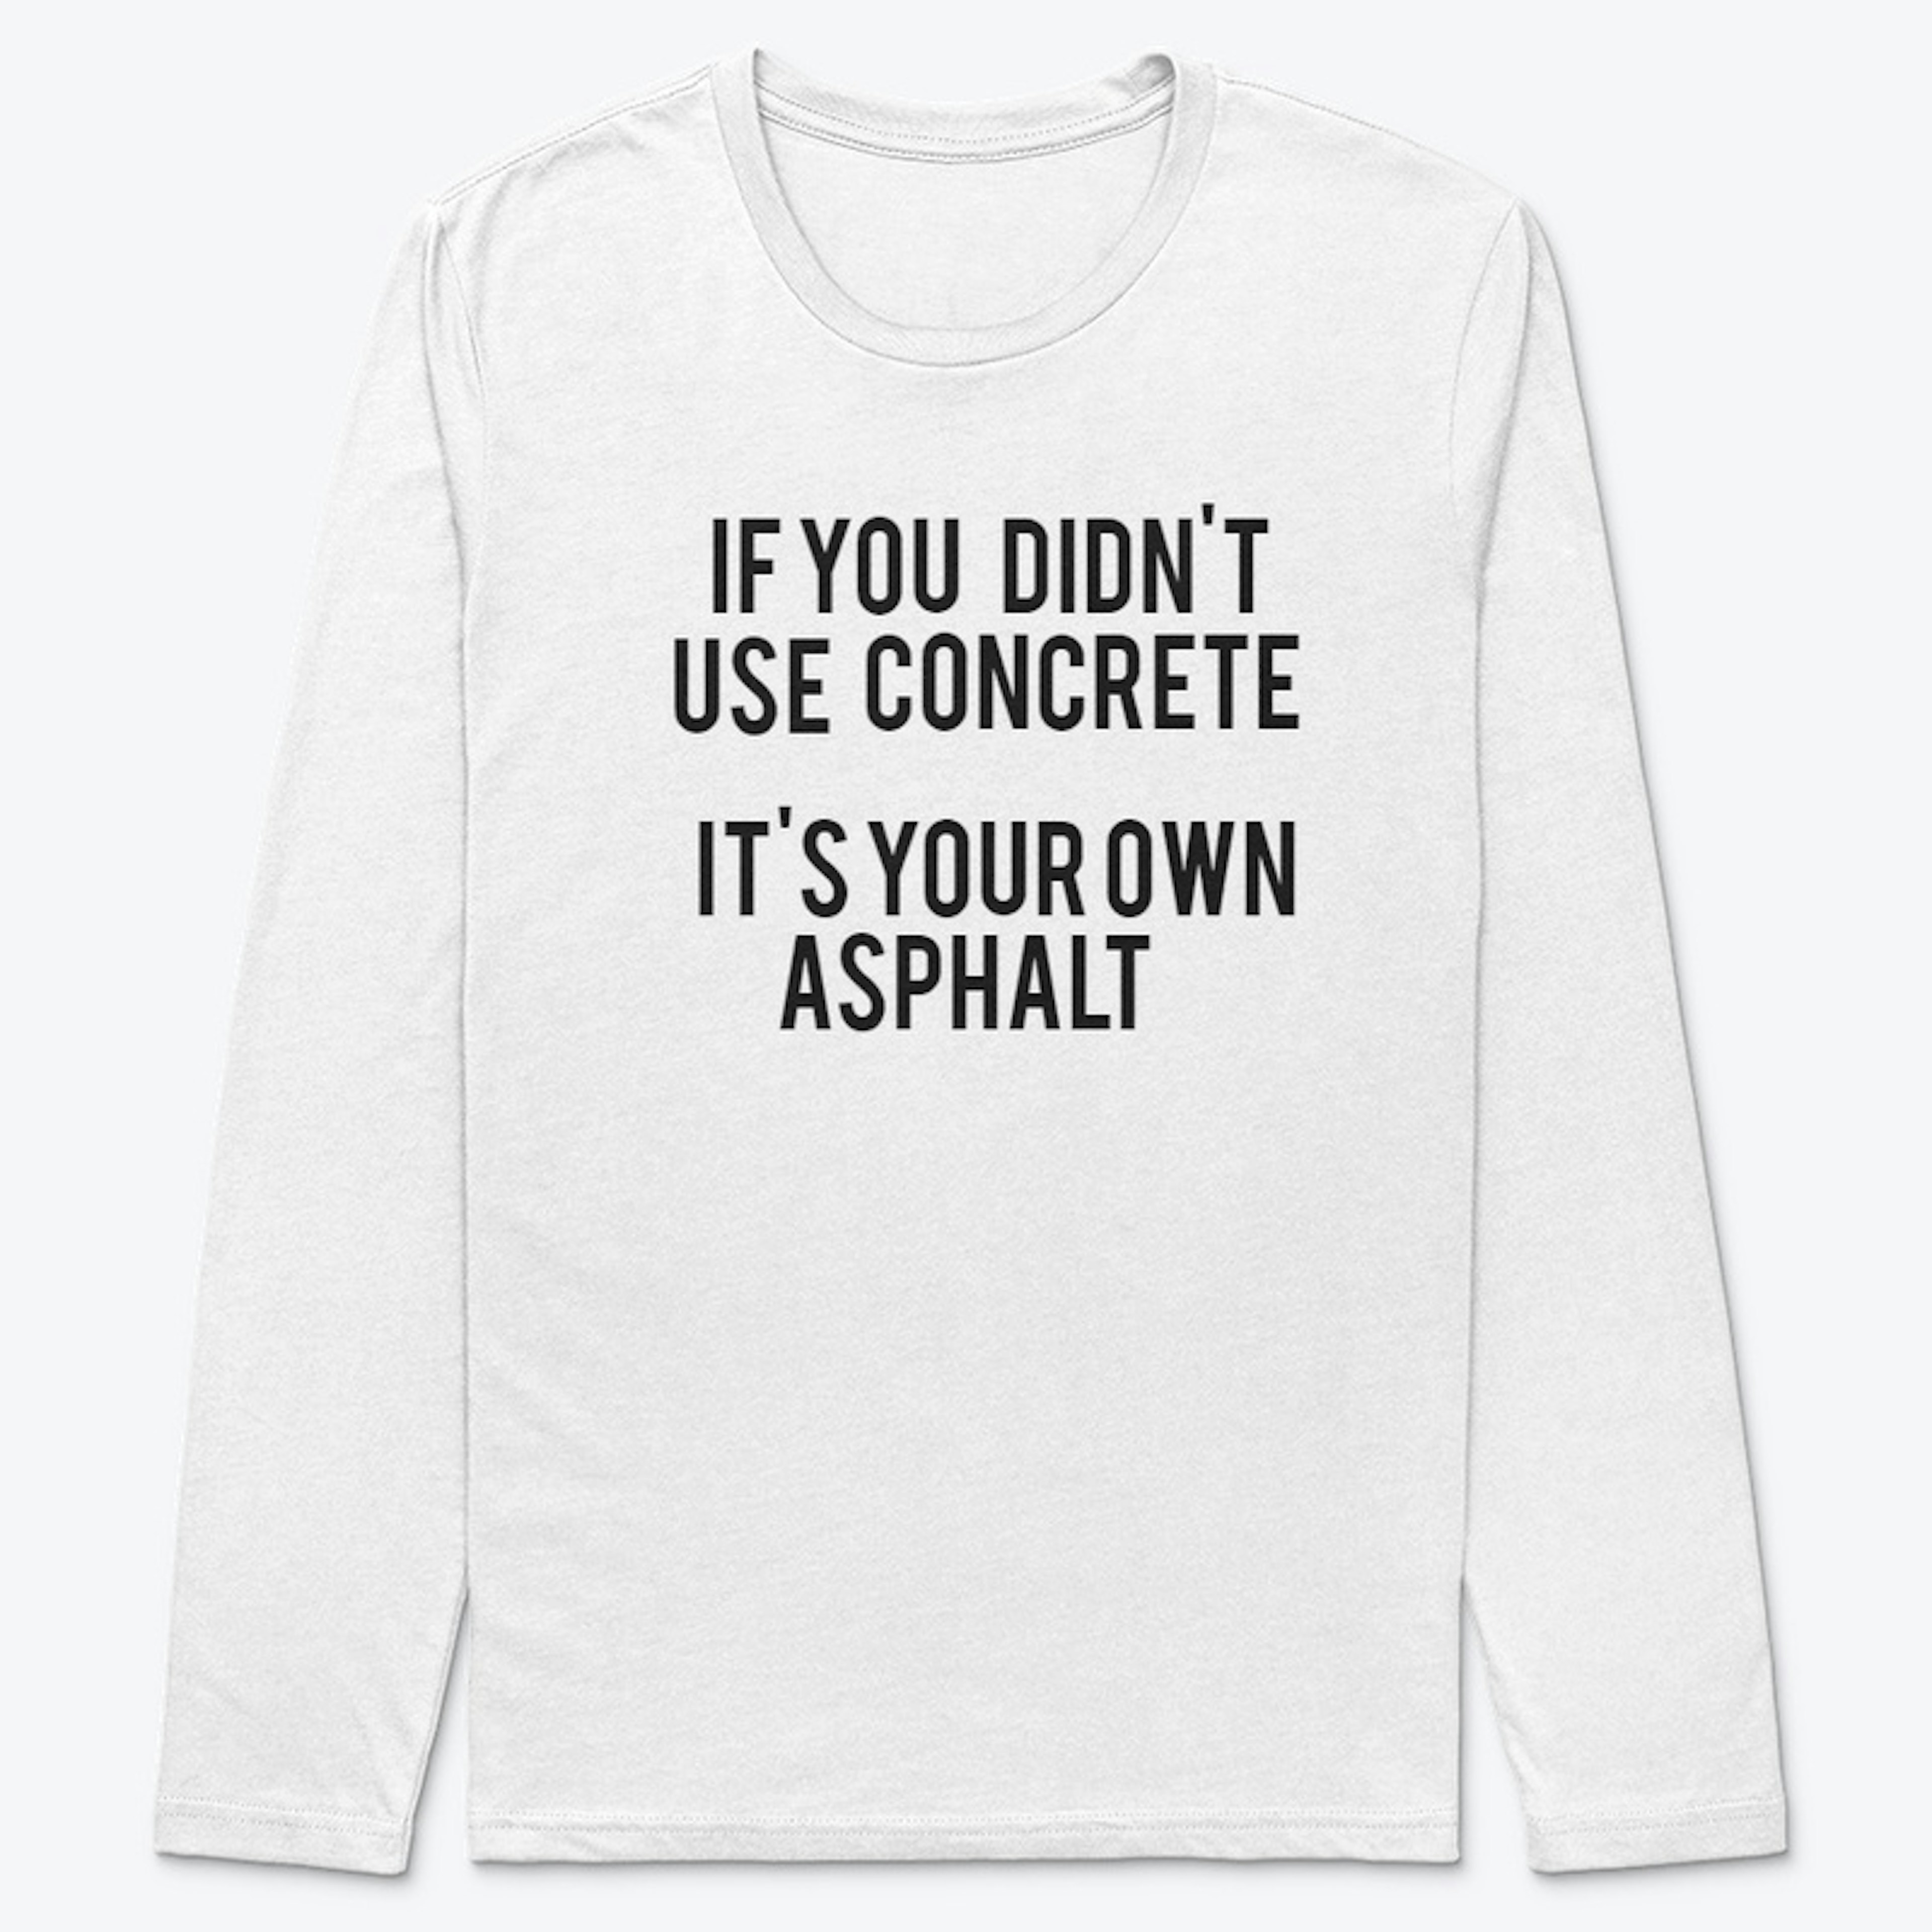 If You Didn't Use Concrete...